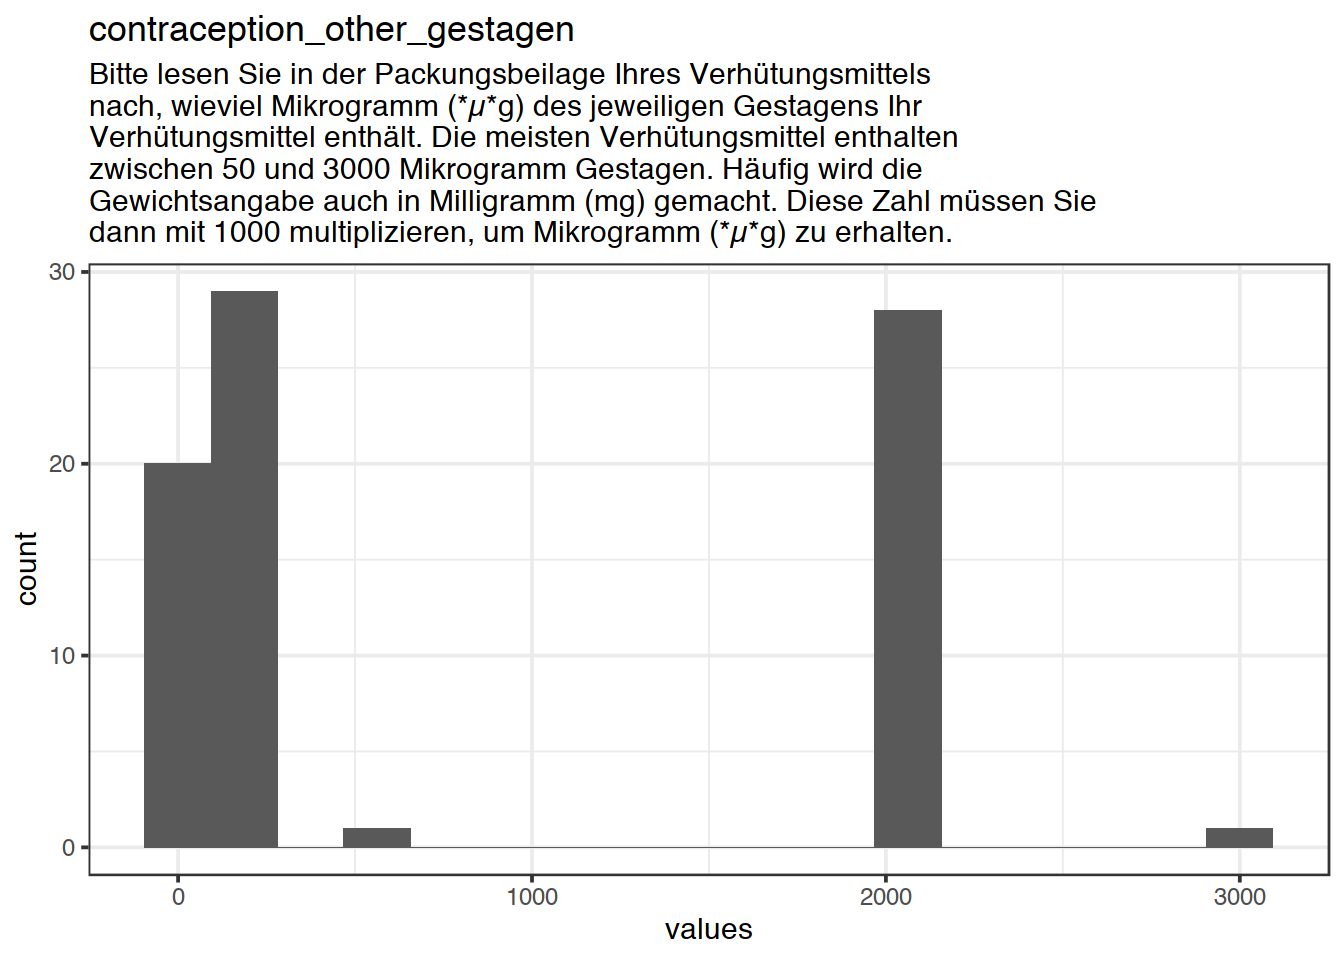 Distribution of values for contraception_other_gestagen